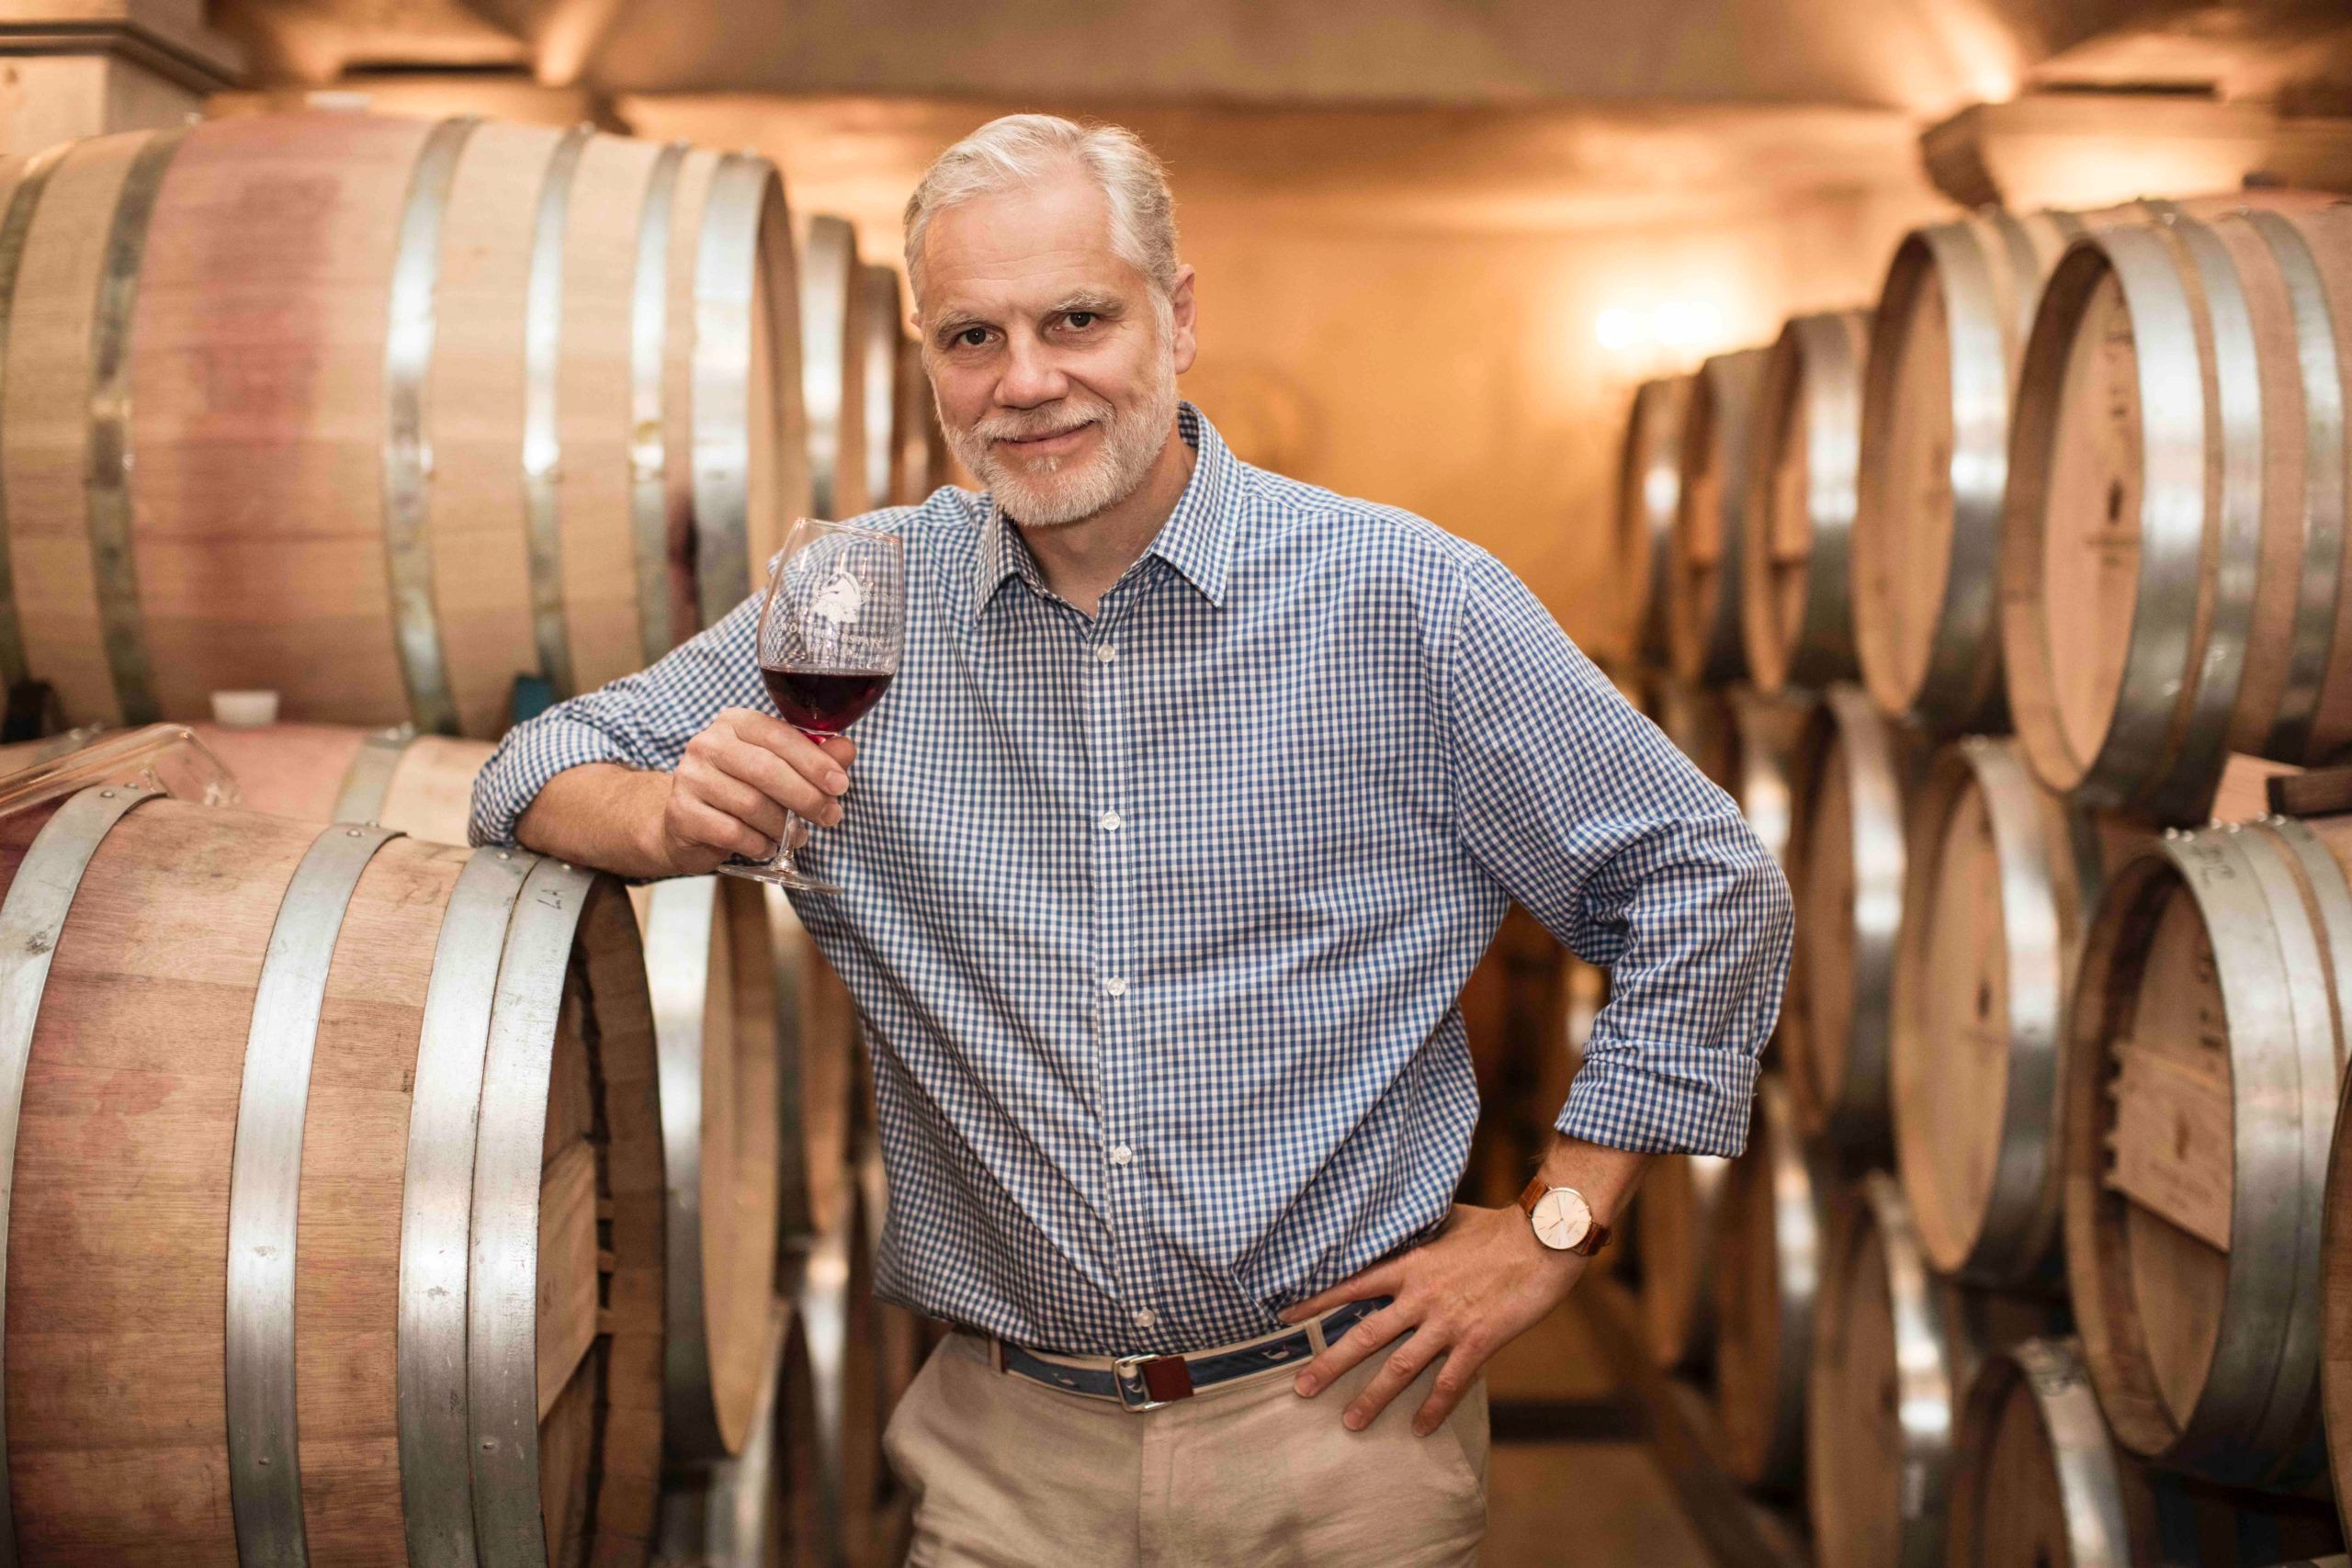 Roman Roth & the quality wines at New York’s Wölffer Estate